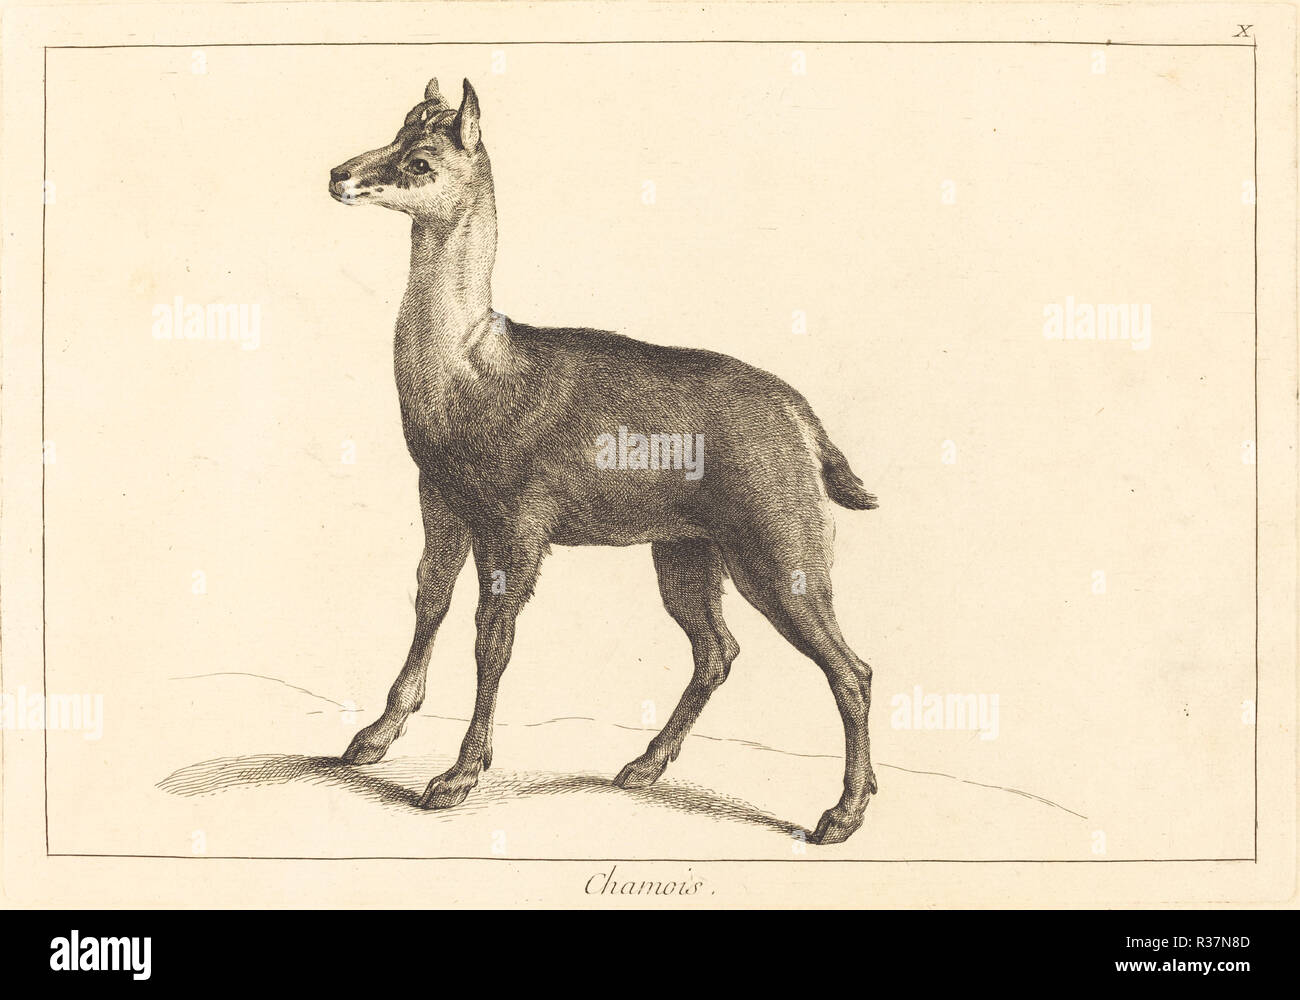 Chamois (Chamois). Medium: etching finished with burin. Museum: National Gallery of Art, Washington DC. Author: Jacques-Philippe Le Bas and Jean Eric Rehn after Jean-Baptiste Oudry. Stock Photo